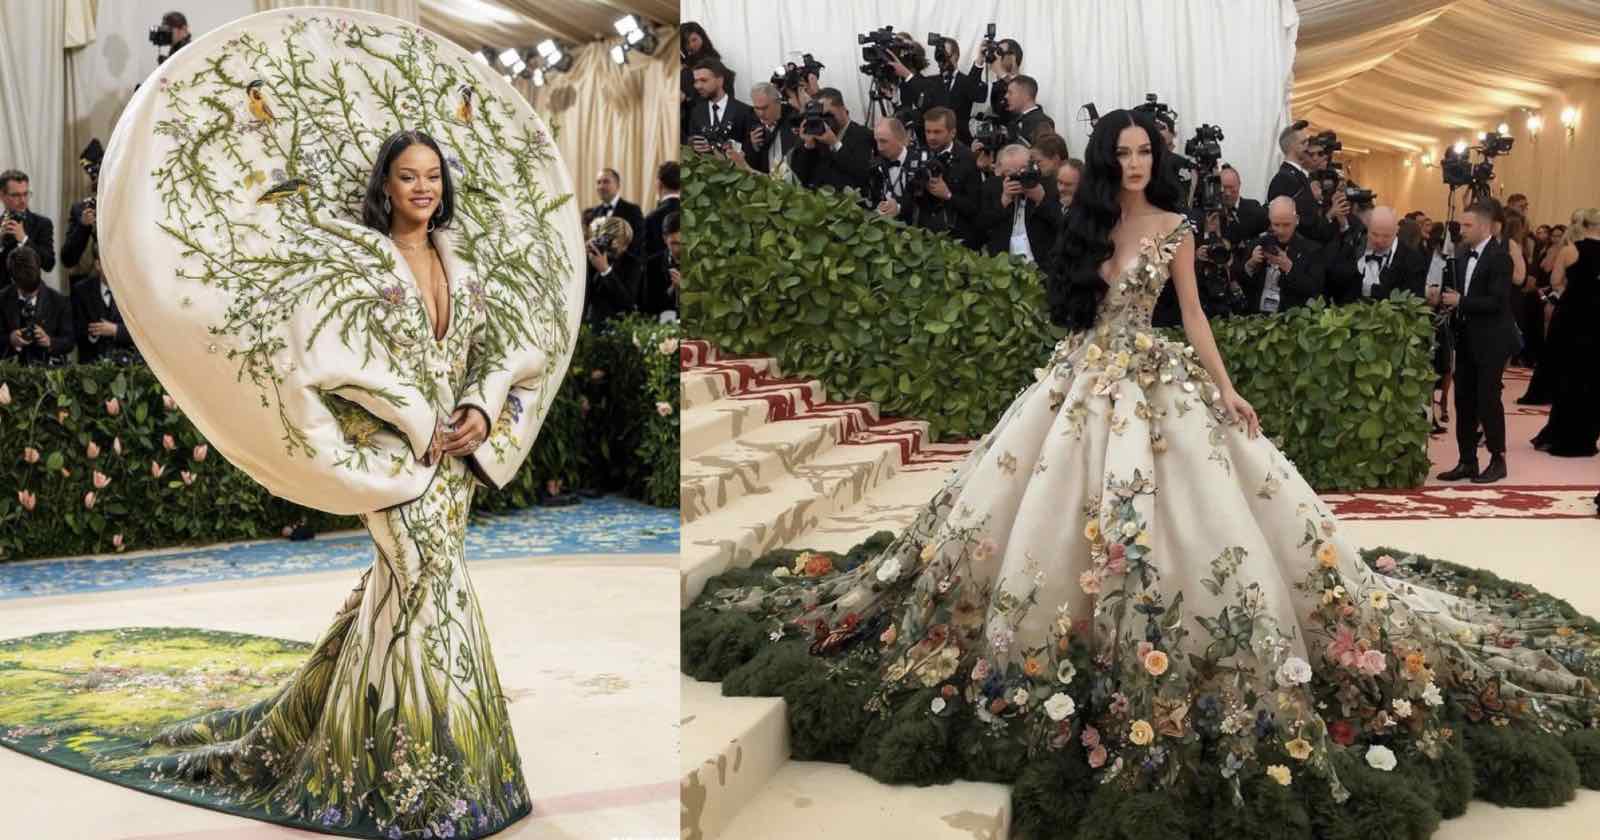 Social Media Users are Fooled by AI Photos of Met Gala